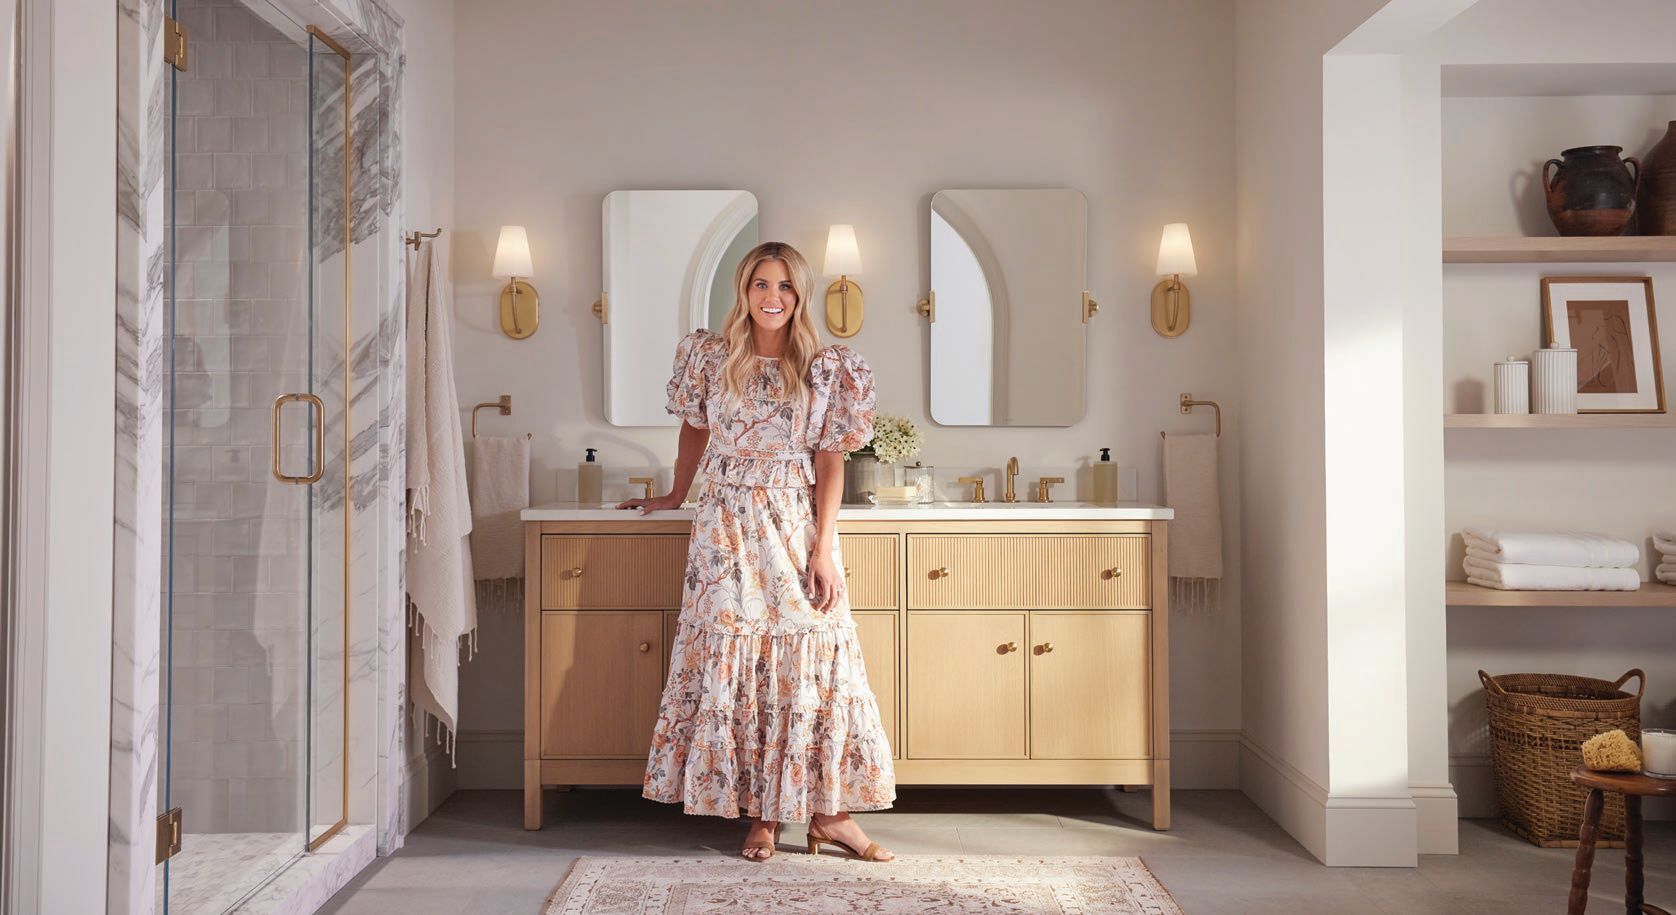 Designer Shea McGee stands beside the Malin vanity, one of the pieces from the Kohler x Studio McGee collection PHOTO COURTESY OF KOHLER